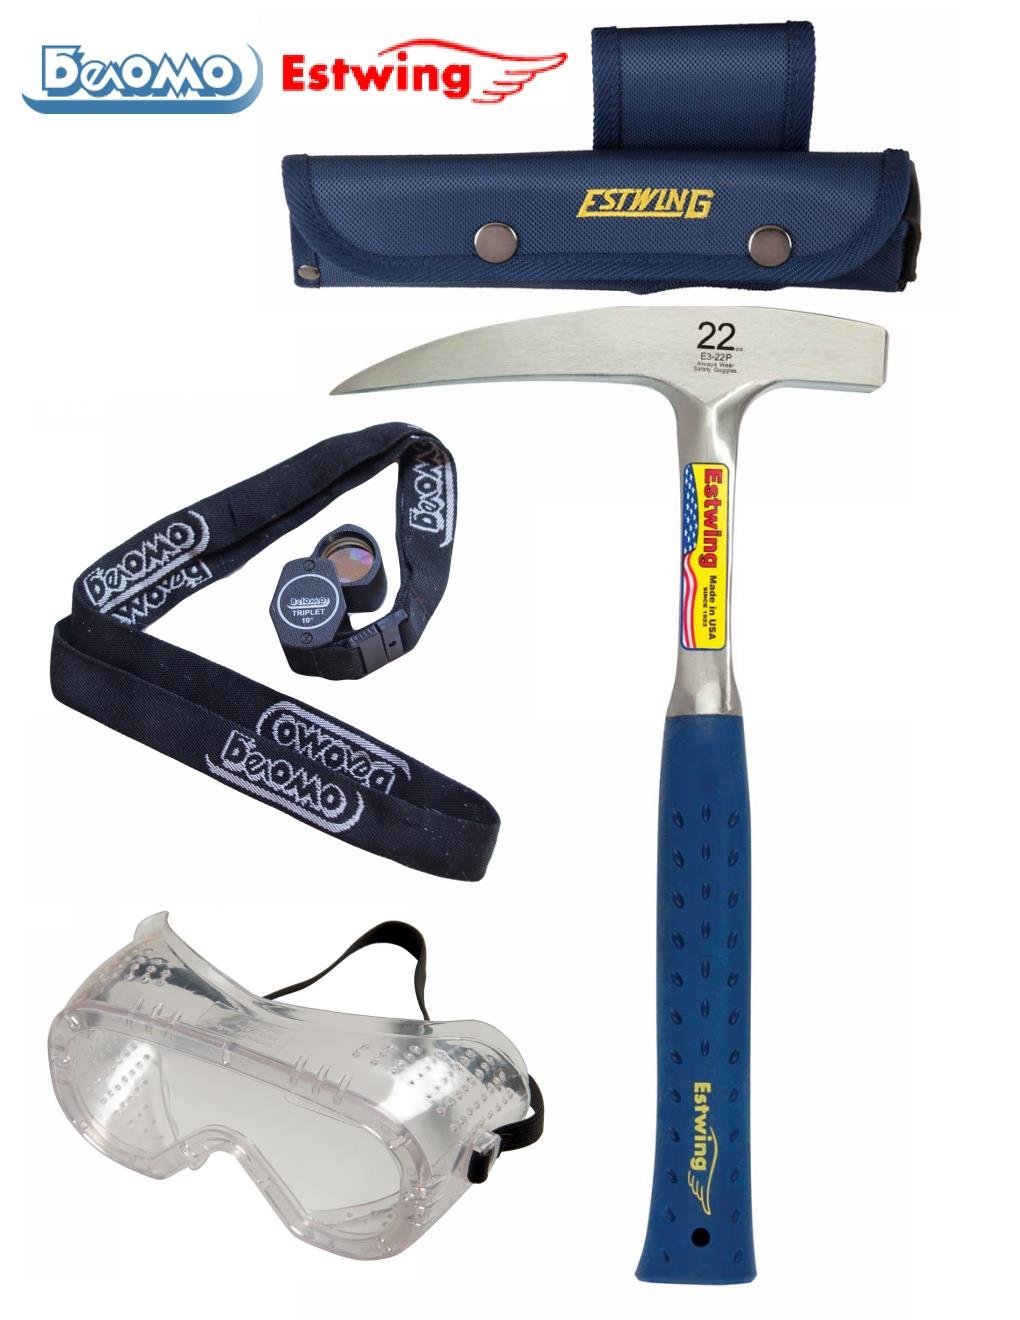 Tools - Currently Rockhounding